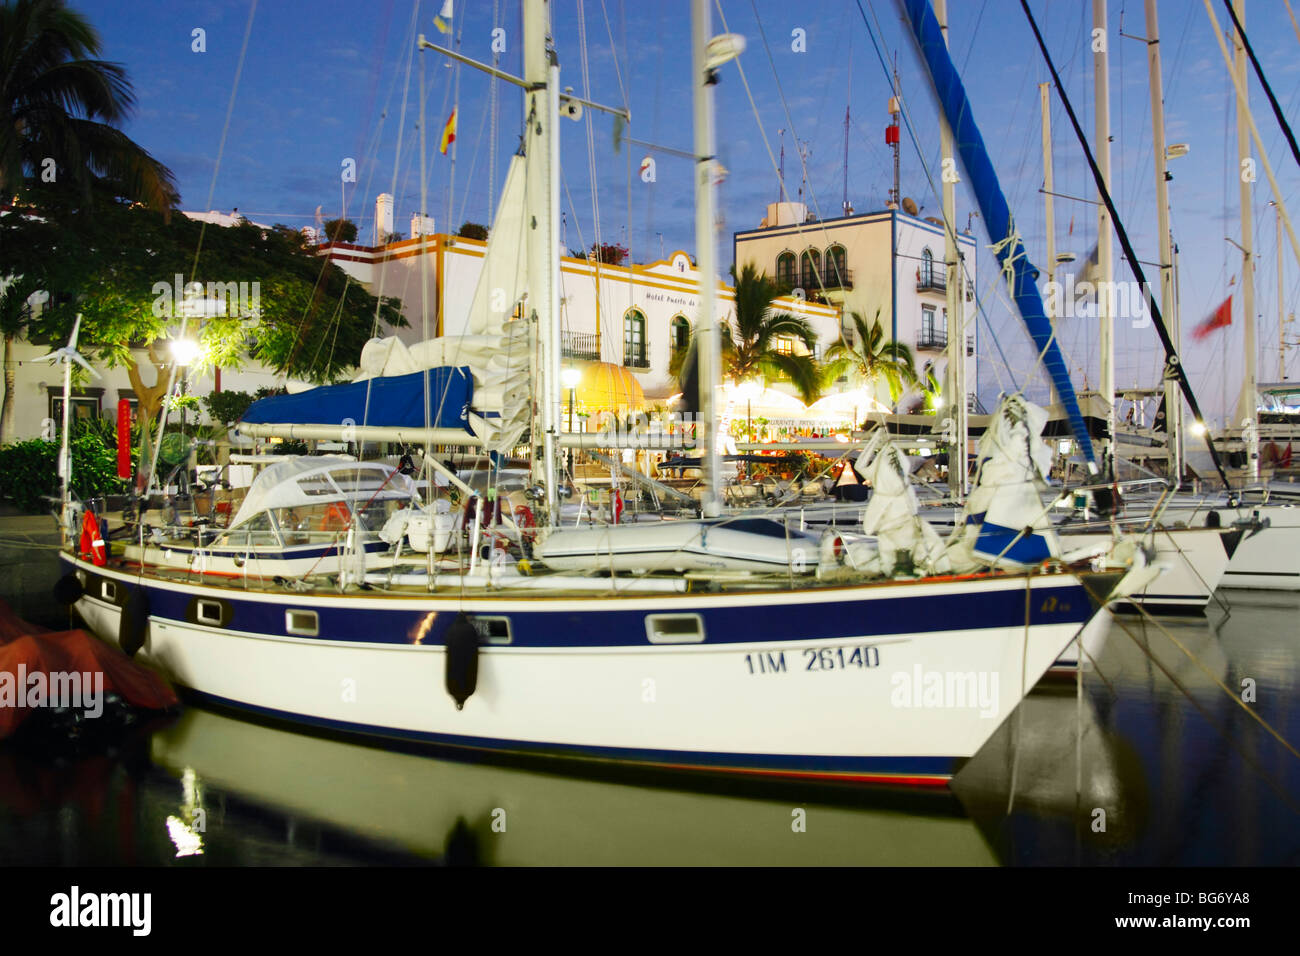 Yachts moored in front of restaurants and hotel in Puerto de Mogan on Gran Canaria in the Canary islands Stock Photo